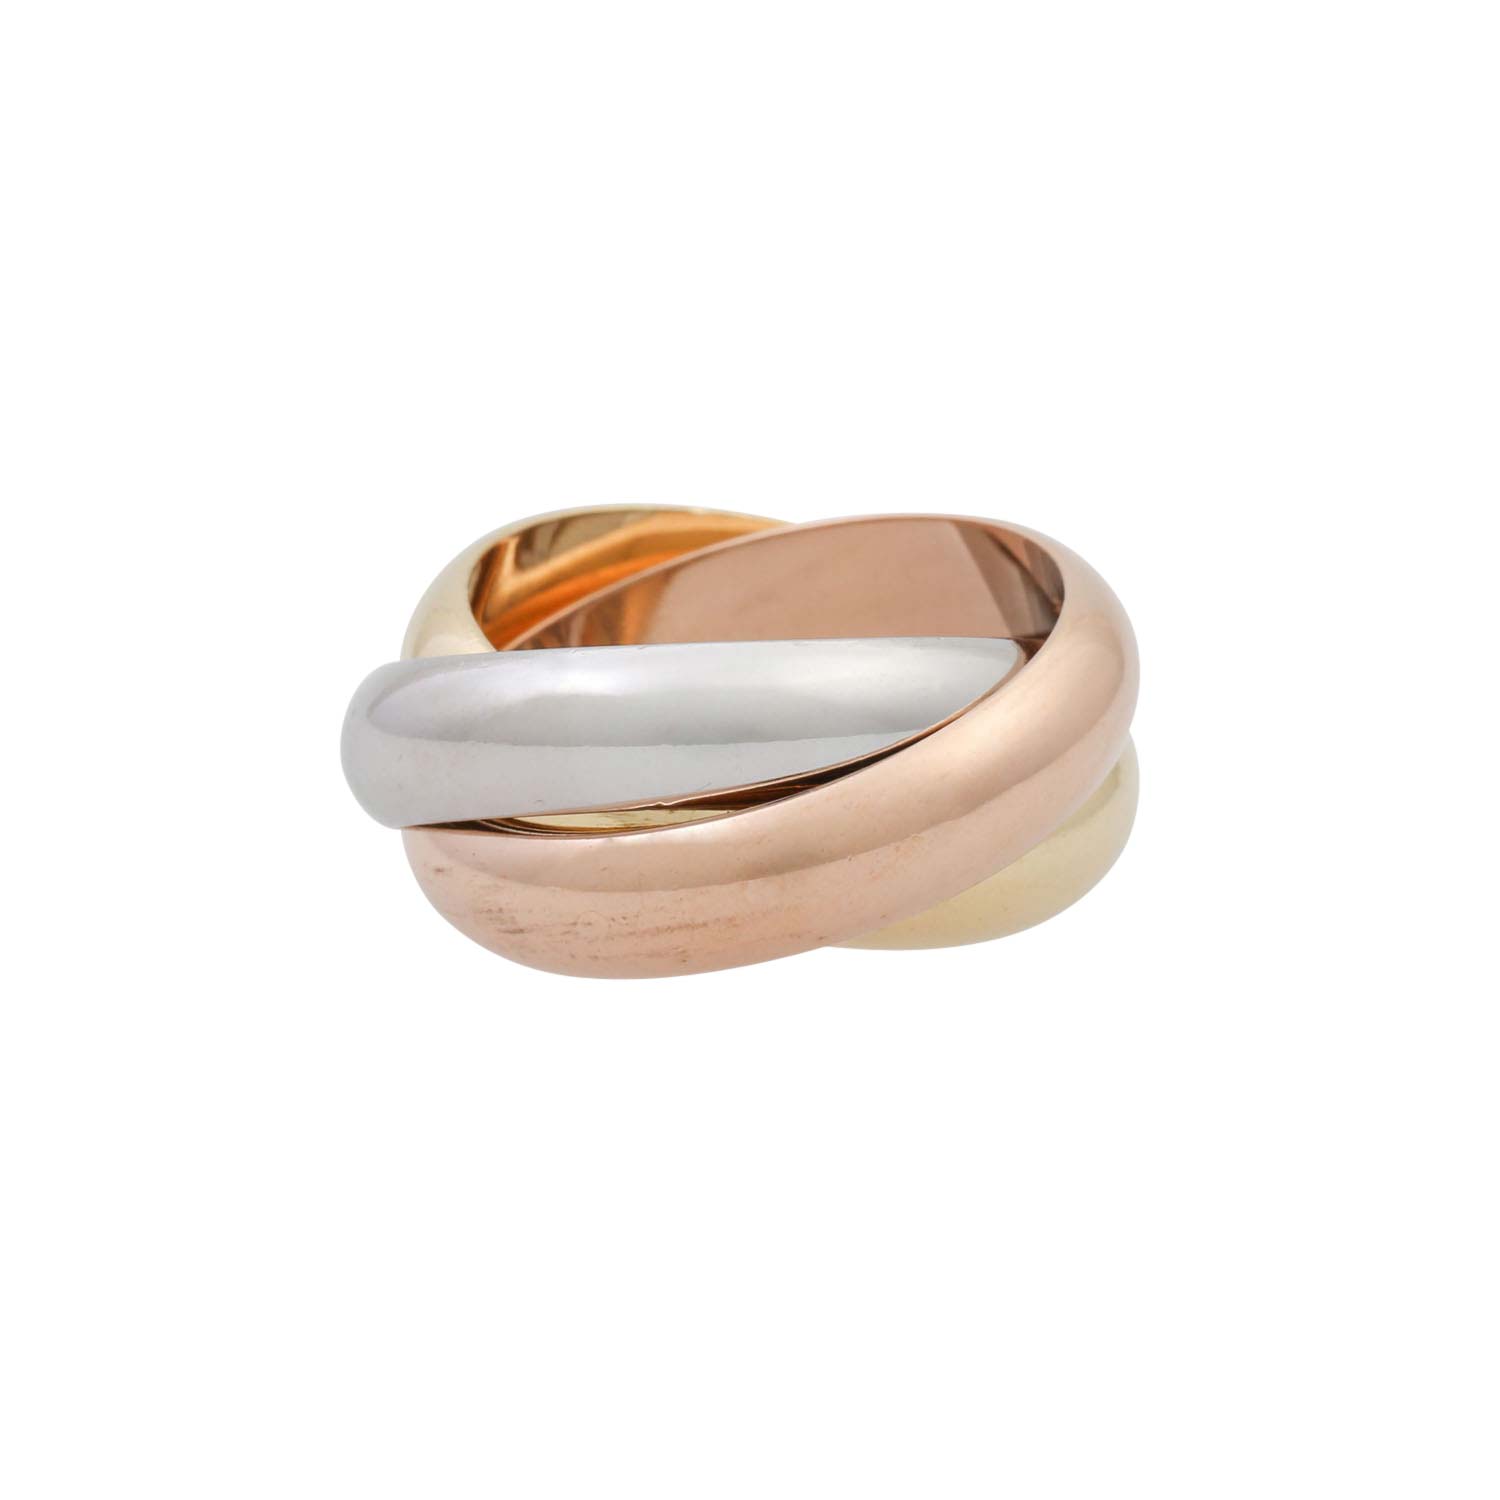 CARTIER Ring "Trinity", - Image 3 of 5